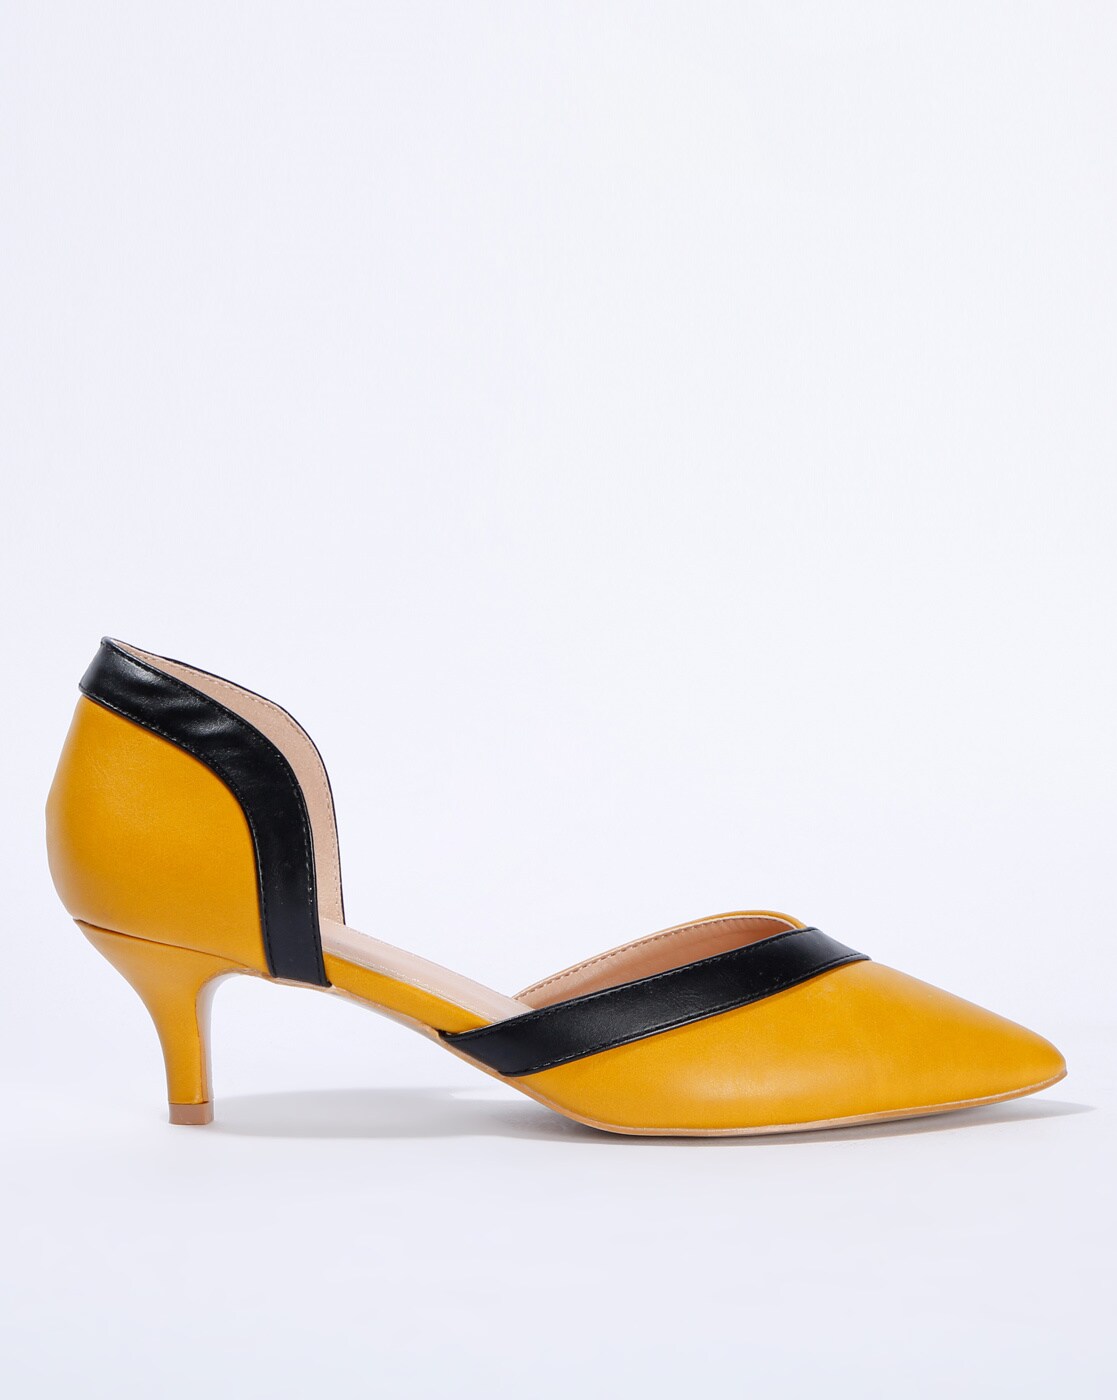 Buy Mustard Yellow Heeled Shoes for Women by Outryt Online | Ajio.com